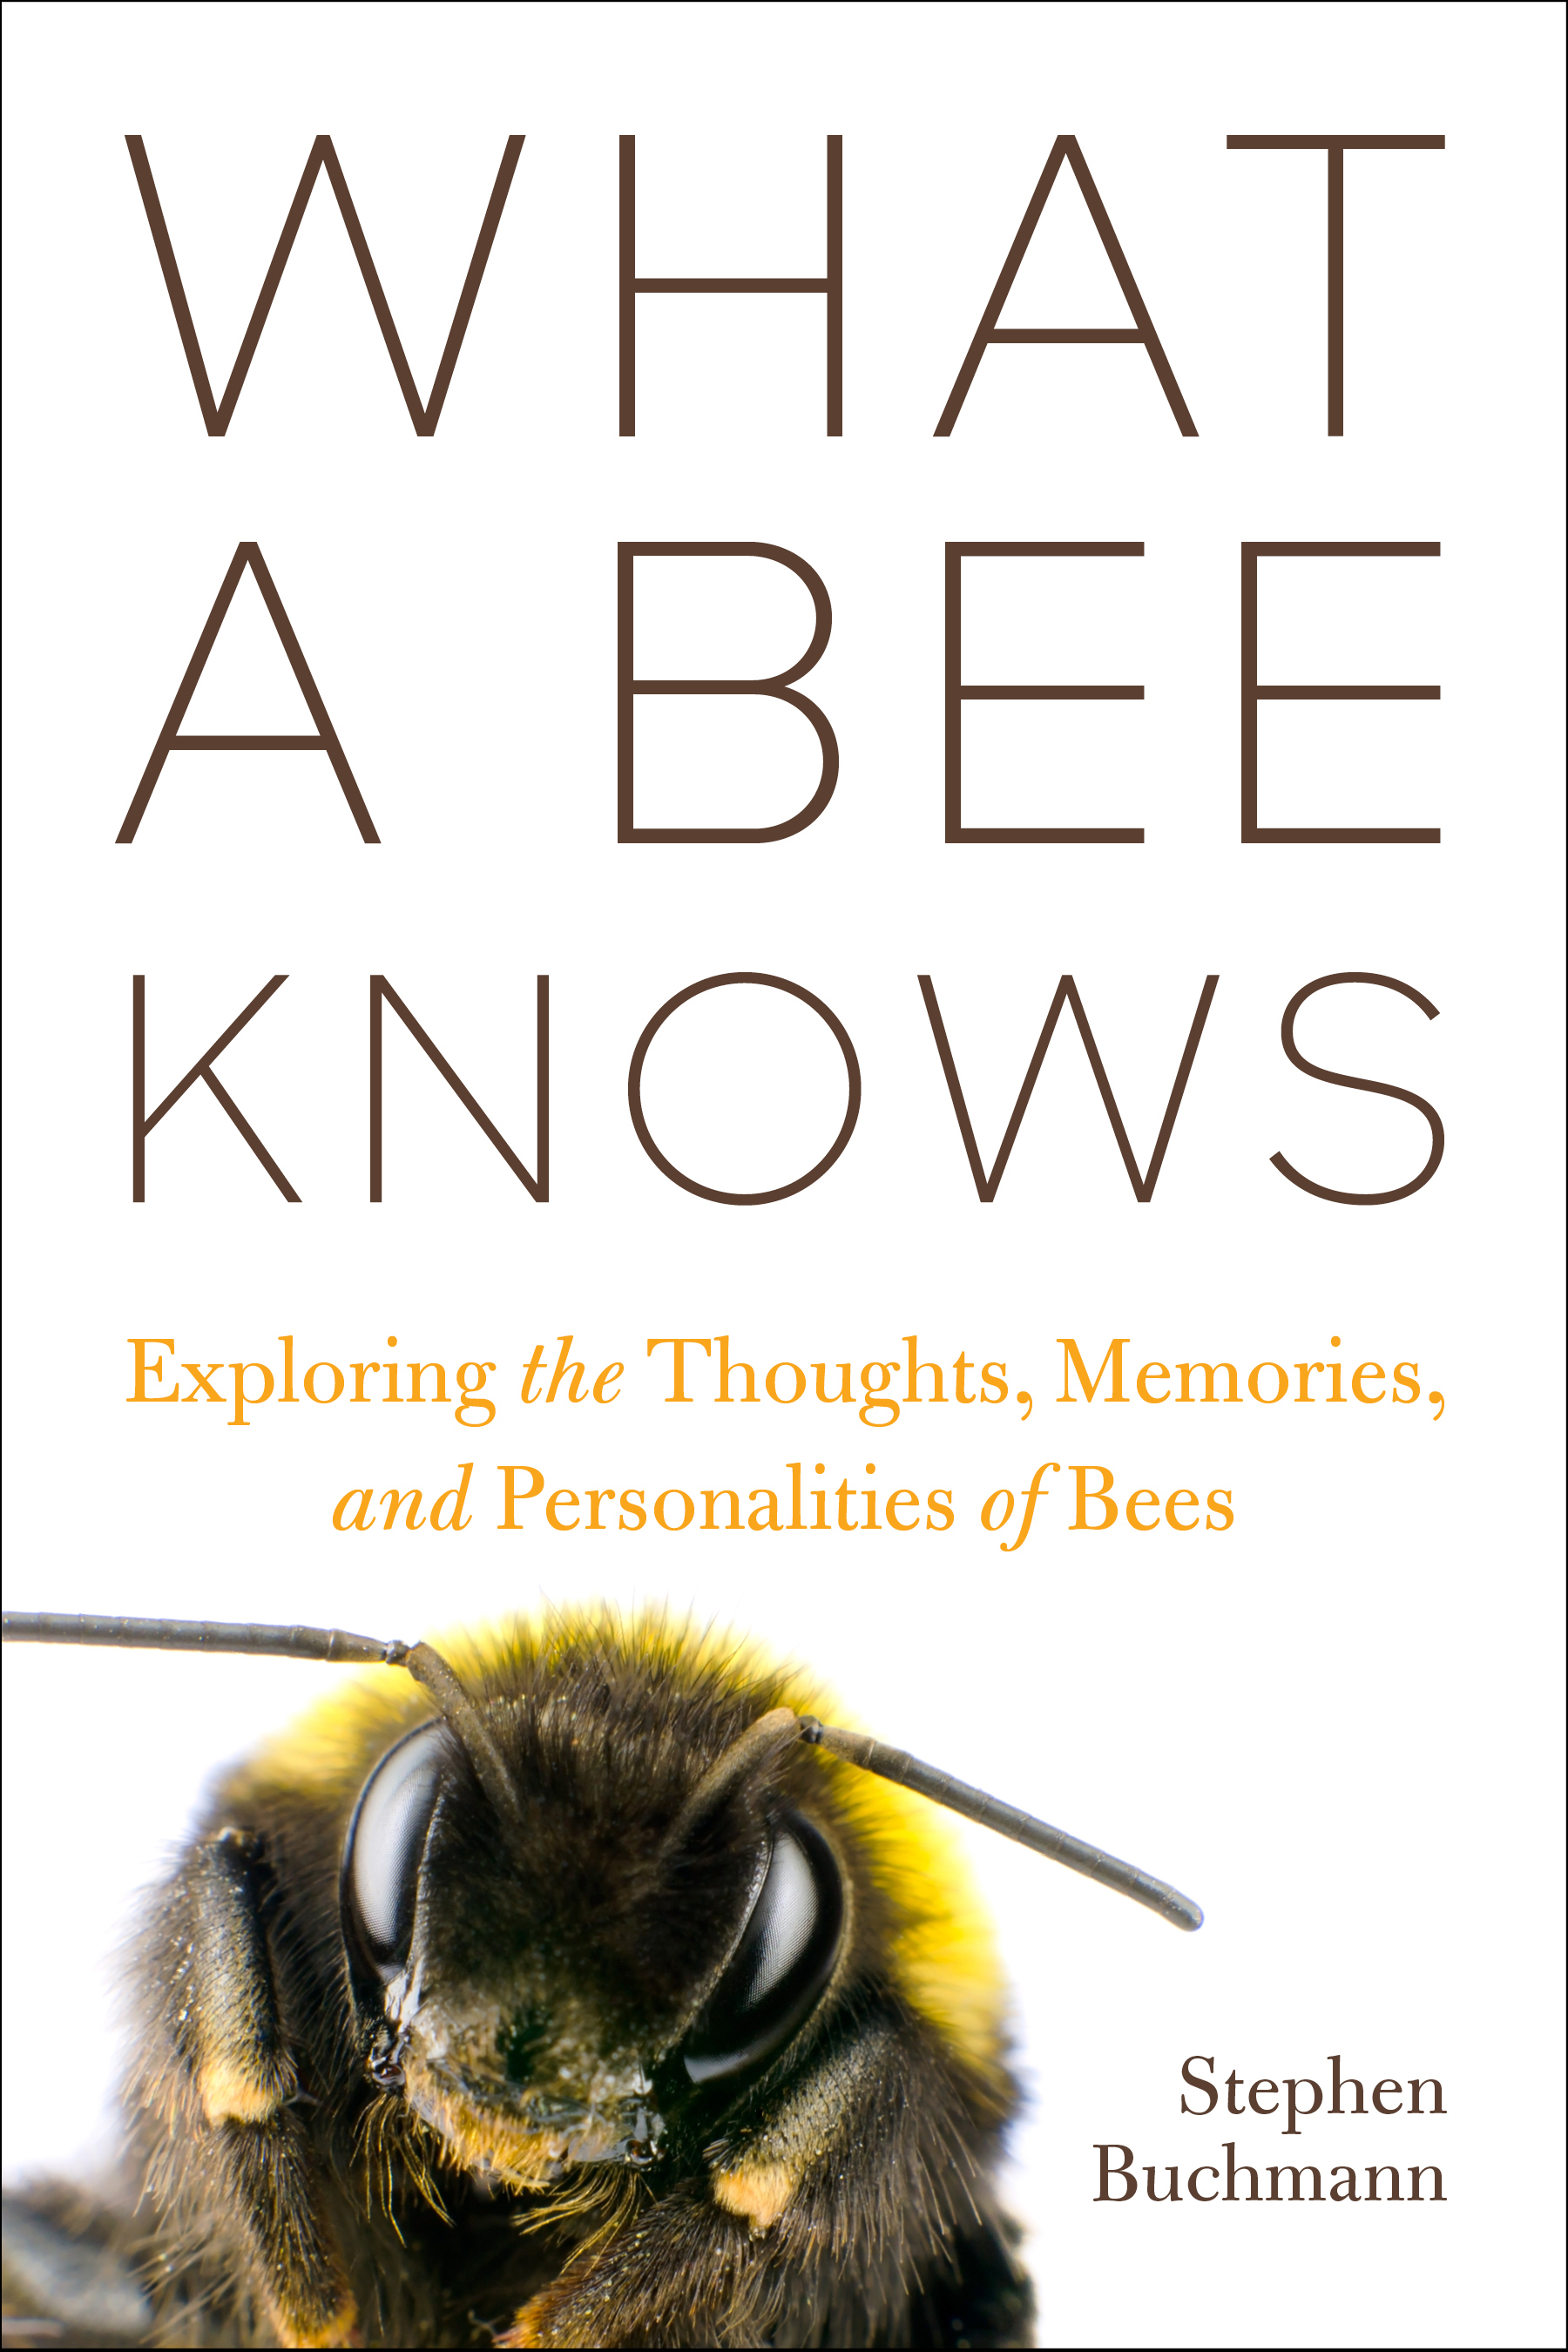 Cover of "What A Bee Knows" Book